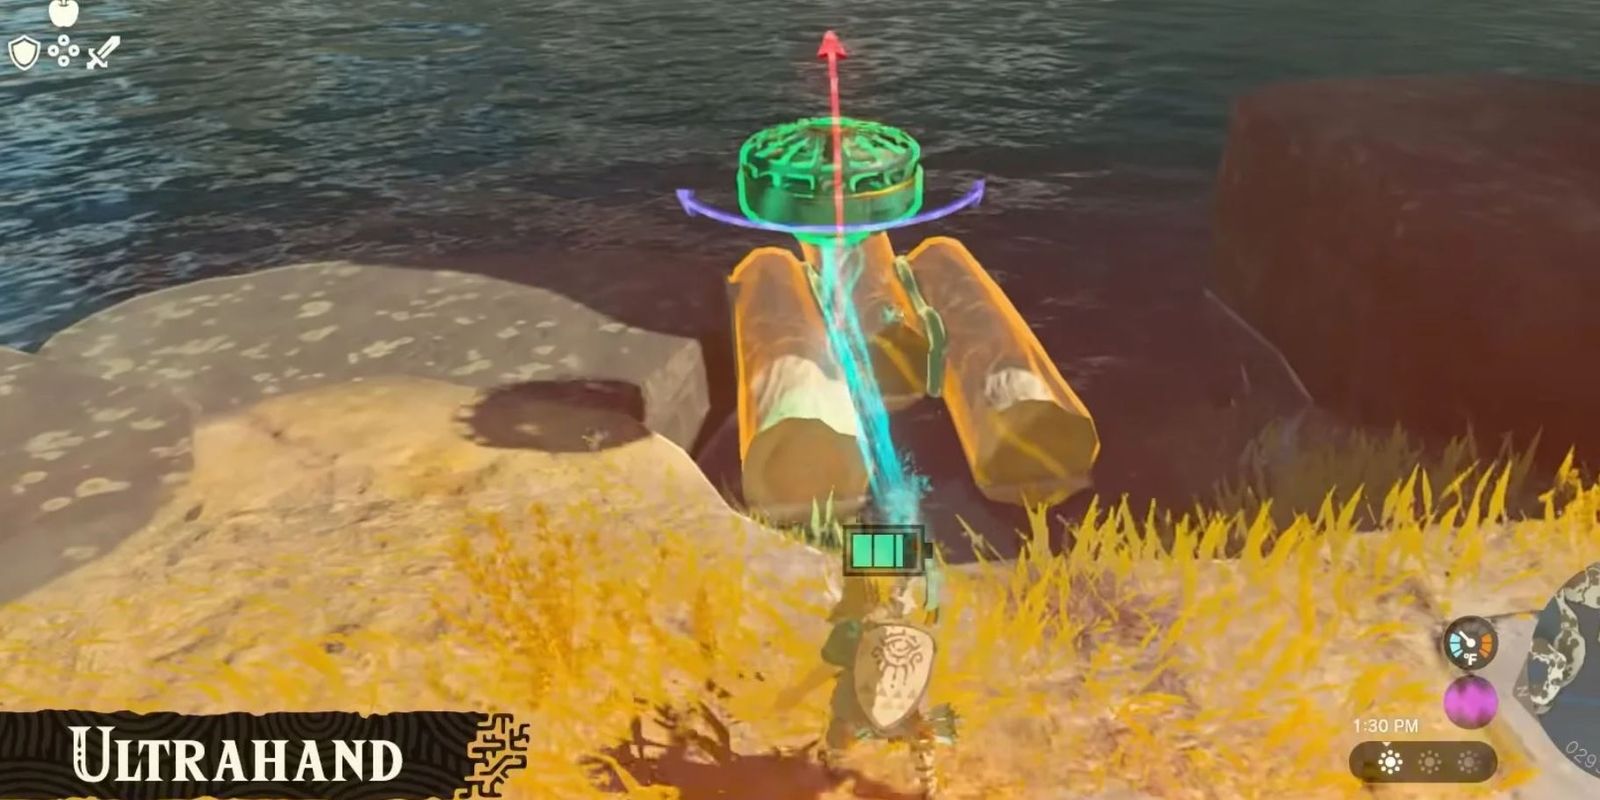 Zelda TOTK Link uses his Ultrahand ability to make a raft